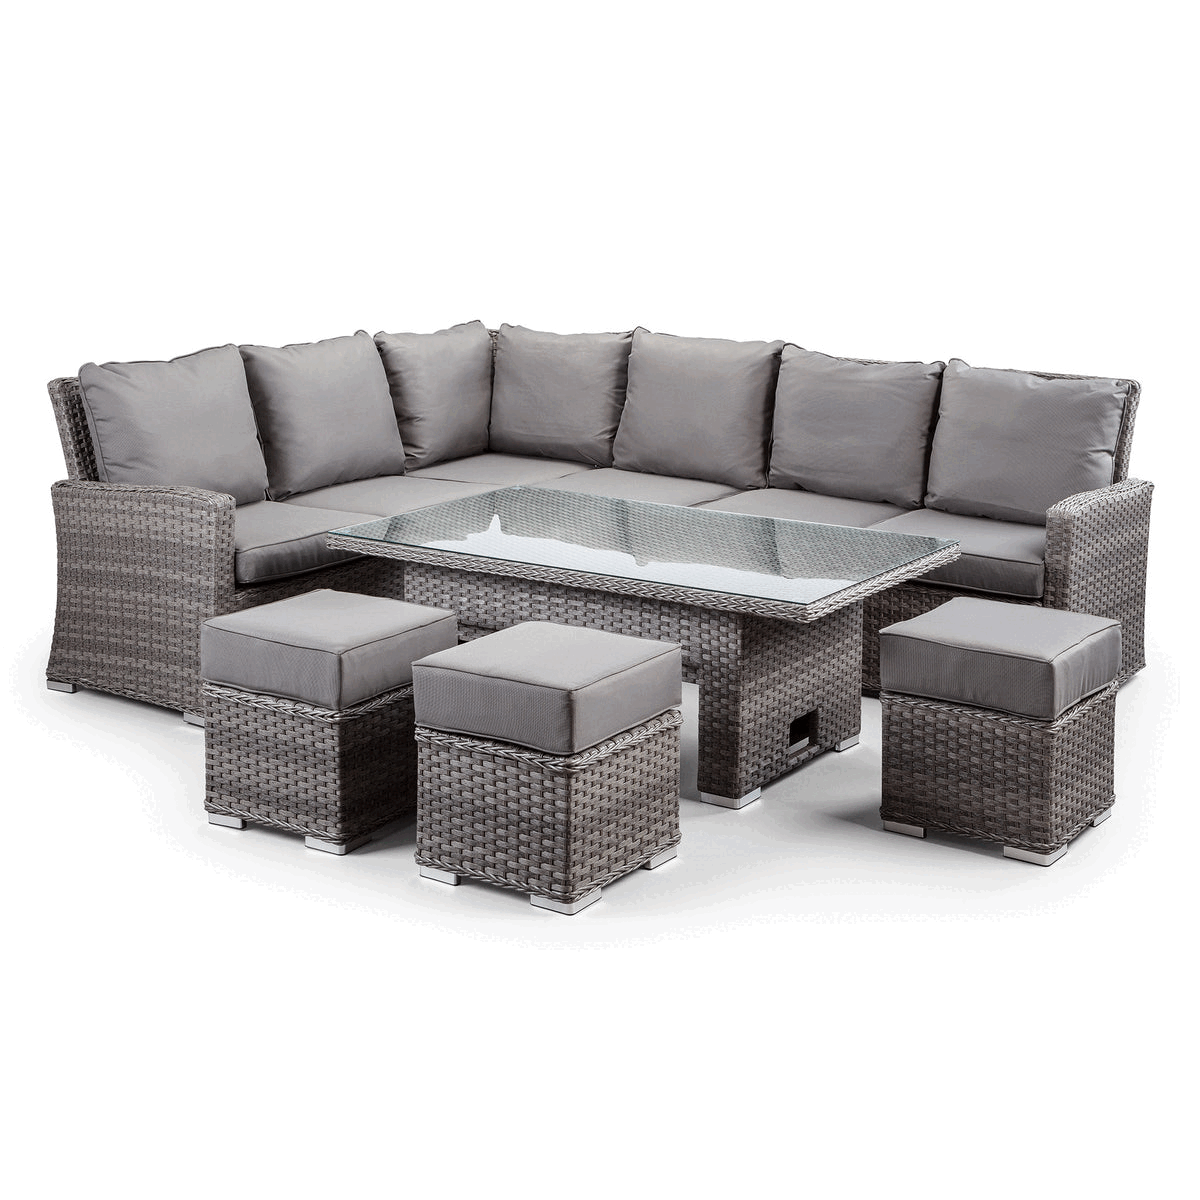 Myla 9 Seater Rattan Garden Furniture Set With Rise & Fall Table